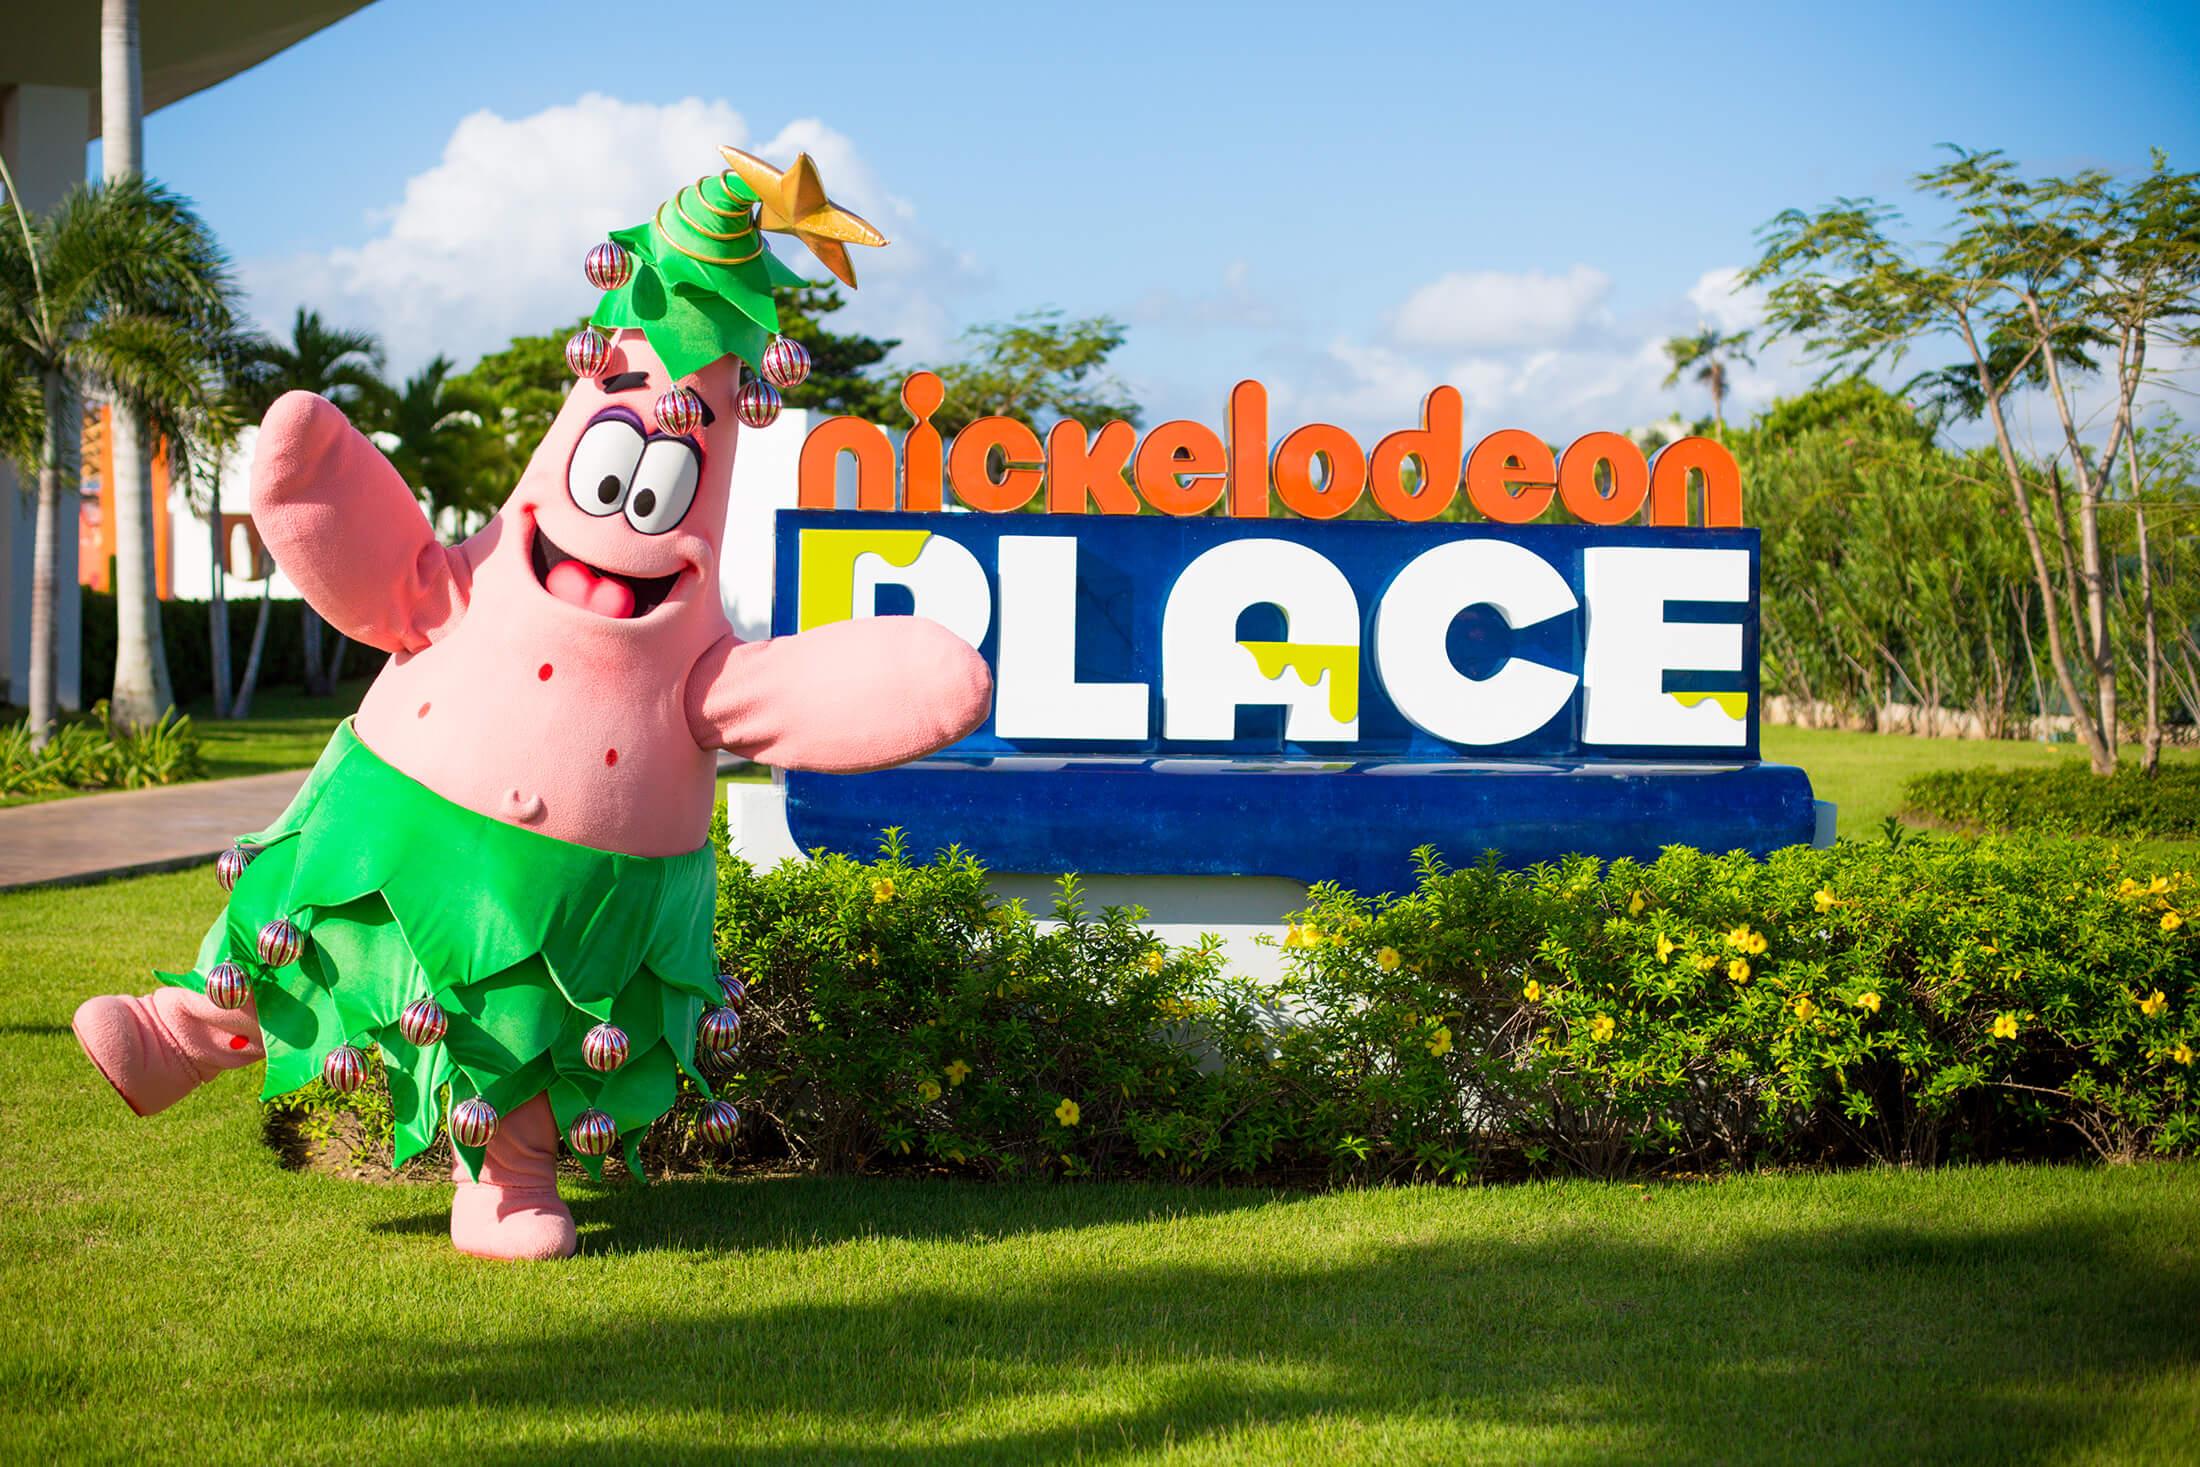 Nickelodeon place